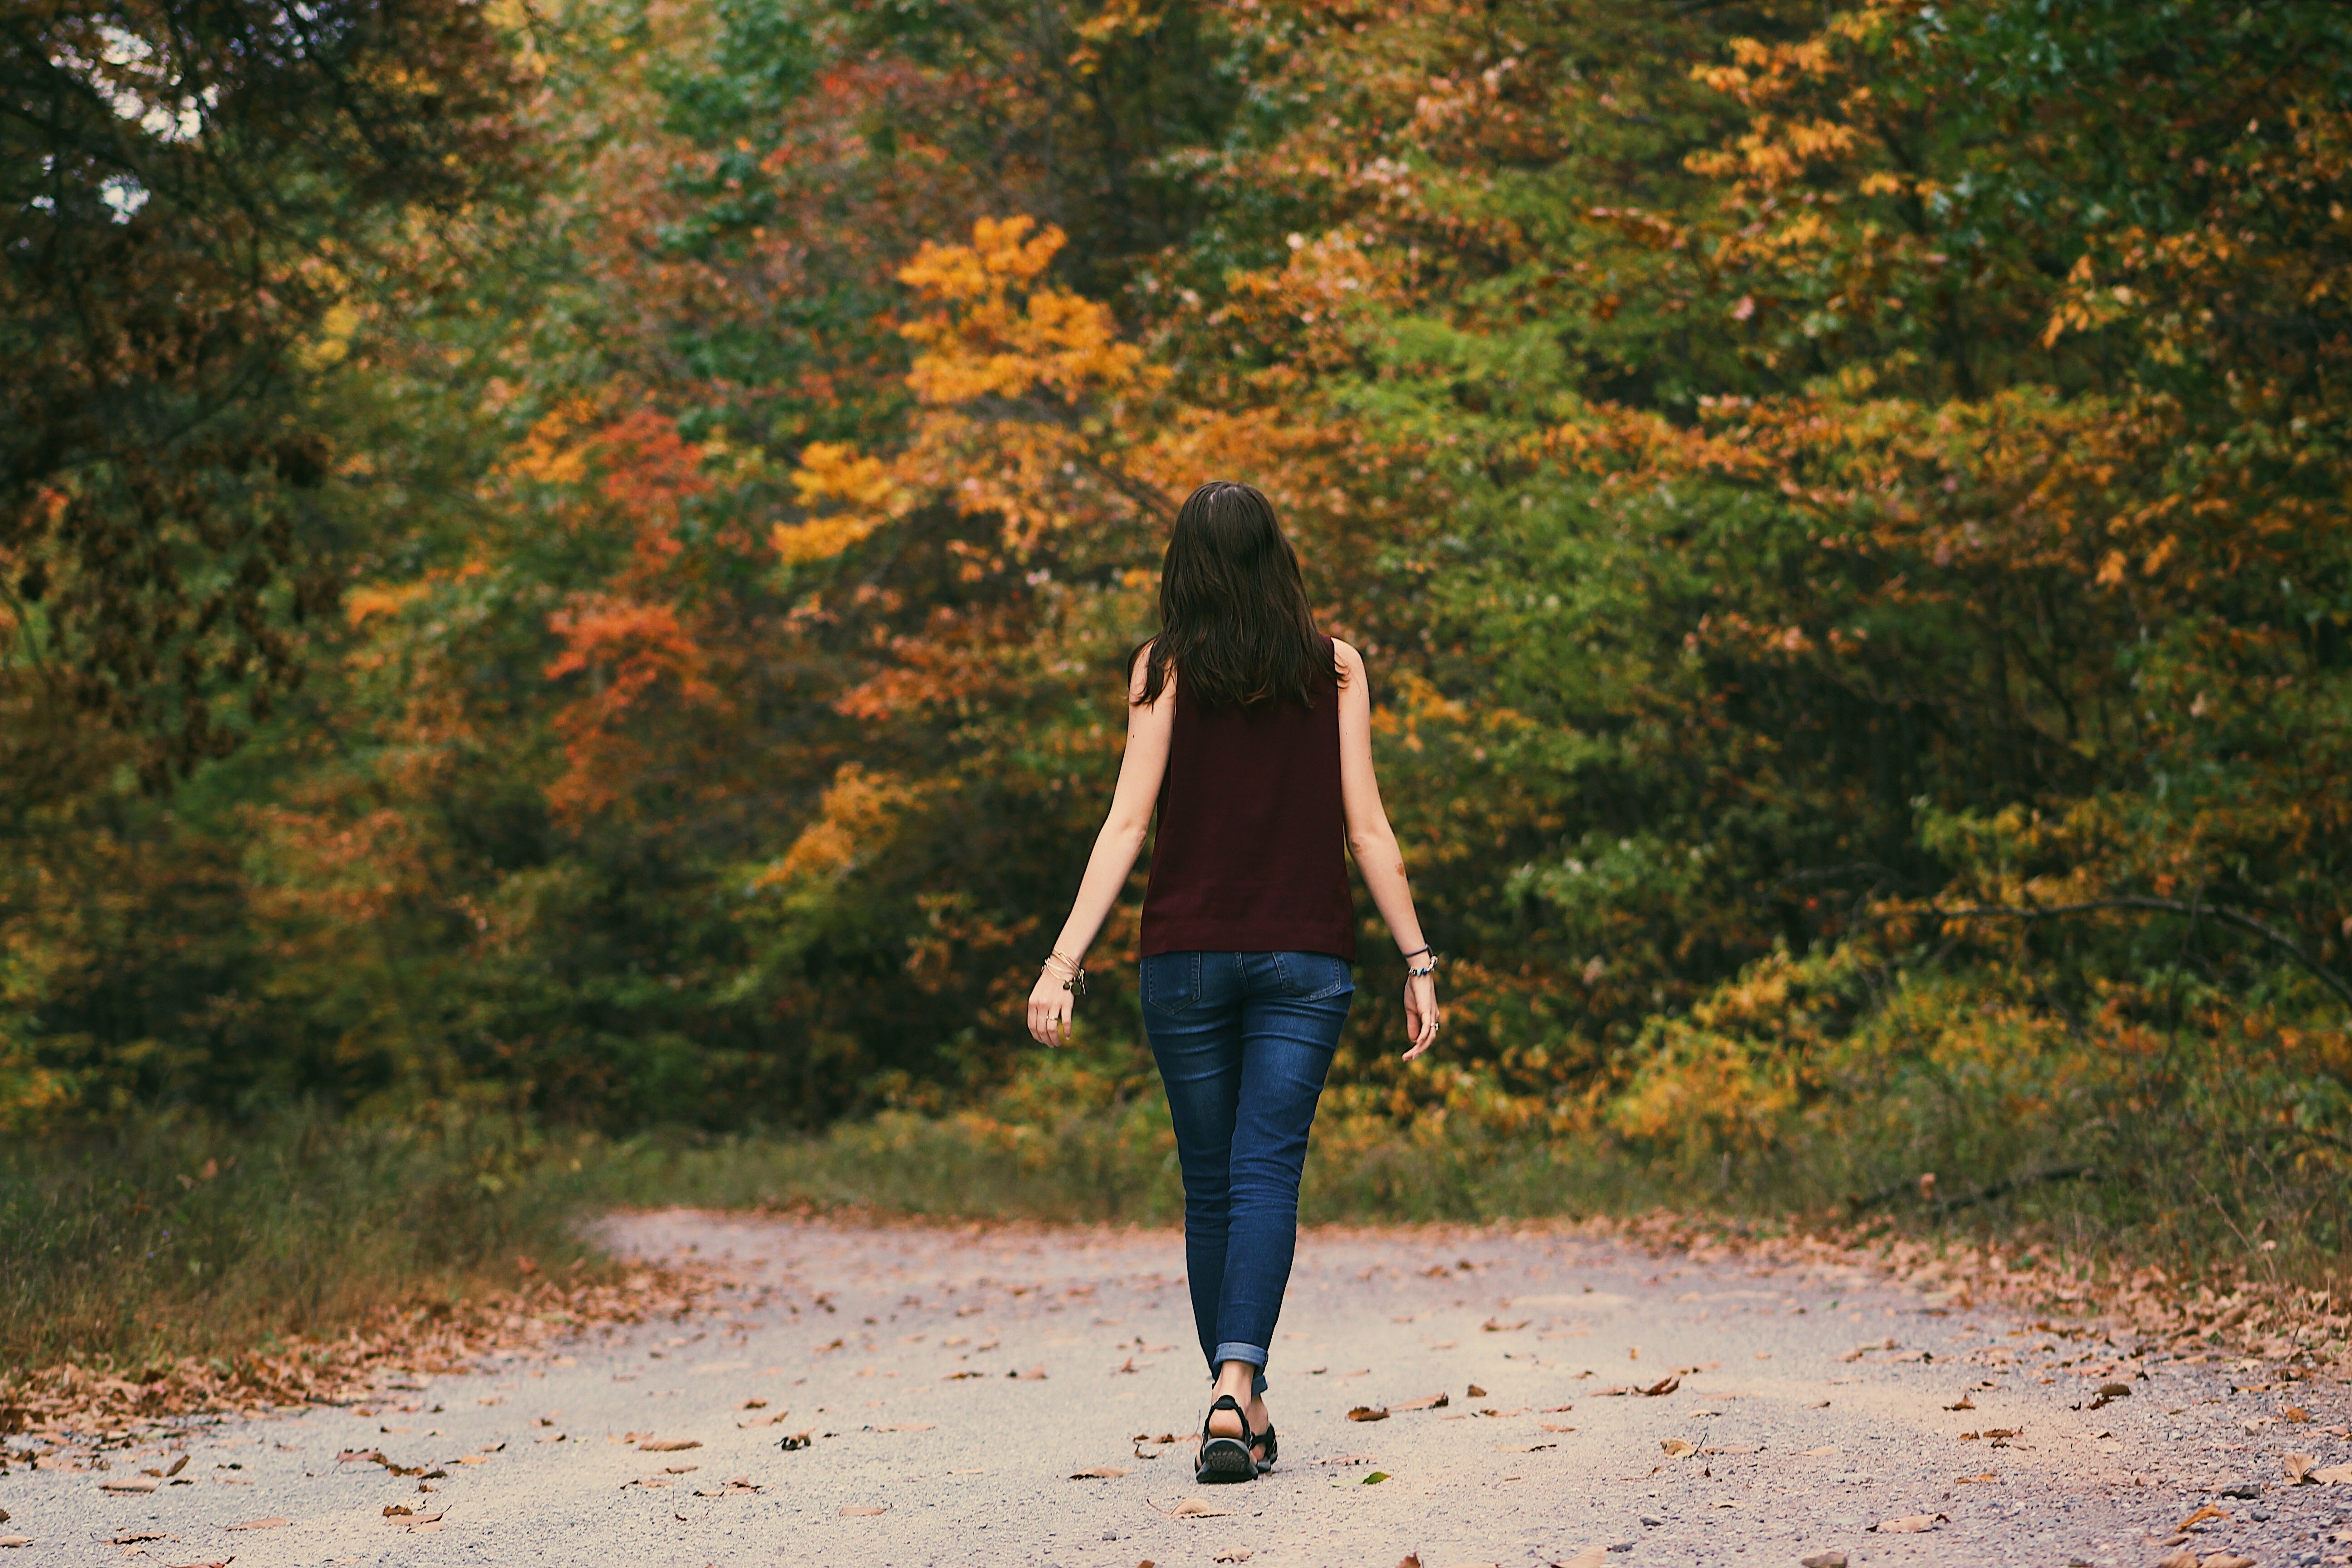 Christine walked through the woods to get to her great-grandmother's cottage. | Source: Pexels